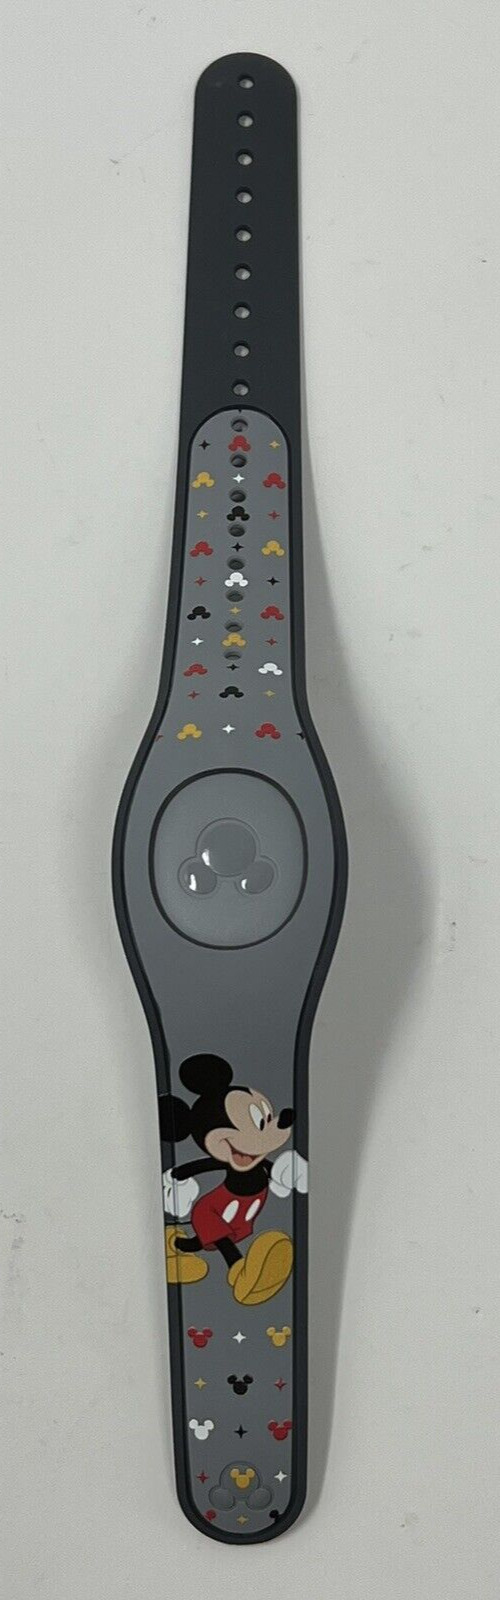 DisneyParks Magicband 2.0 - Magic Bands - Mickey Mouse - Unlinked / New